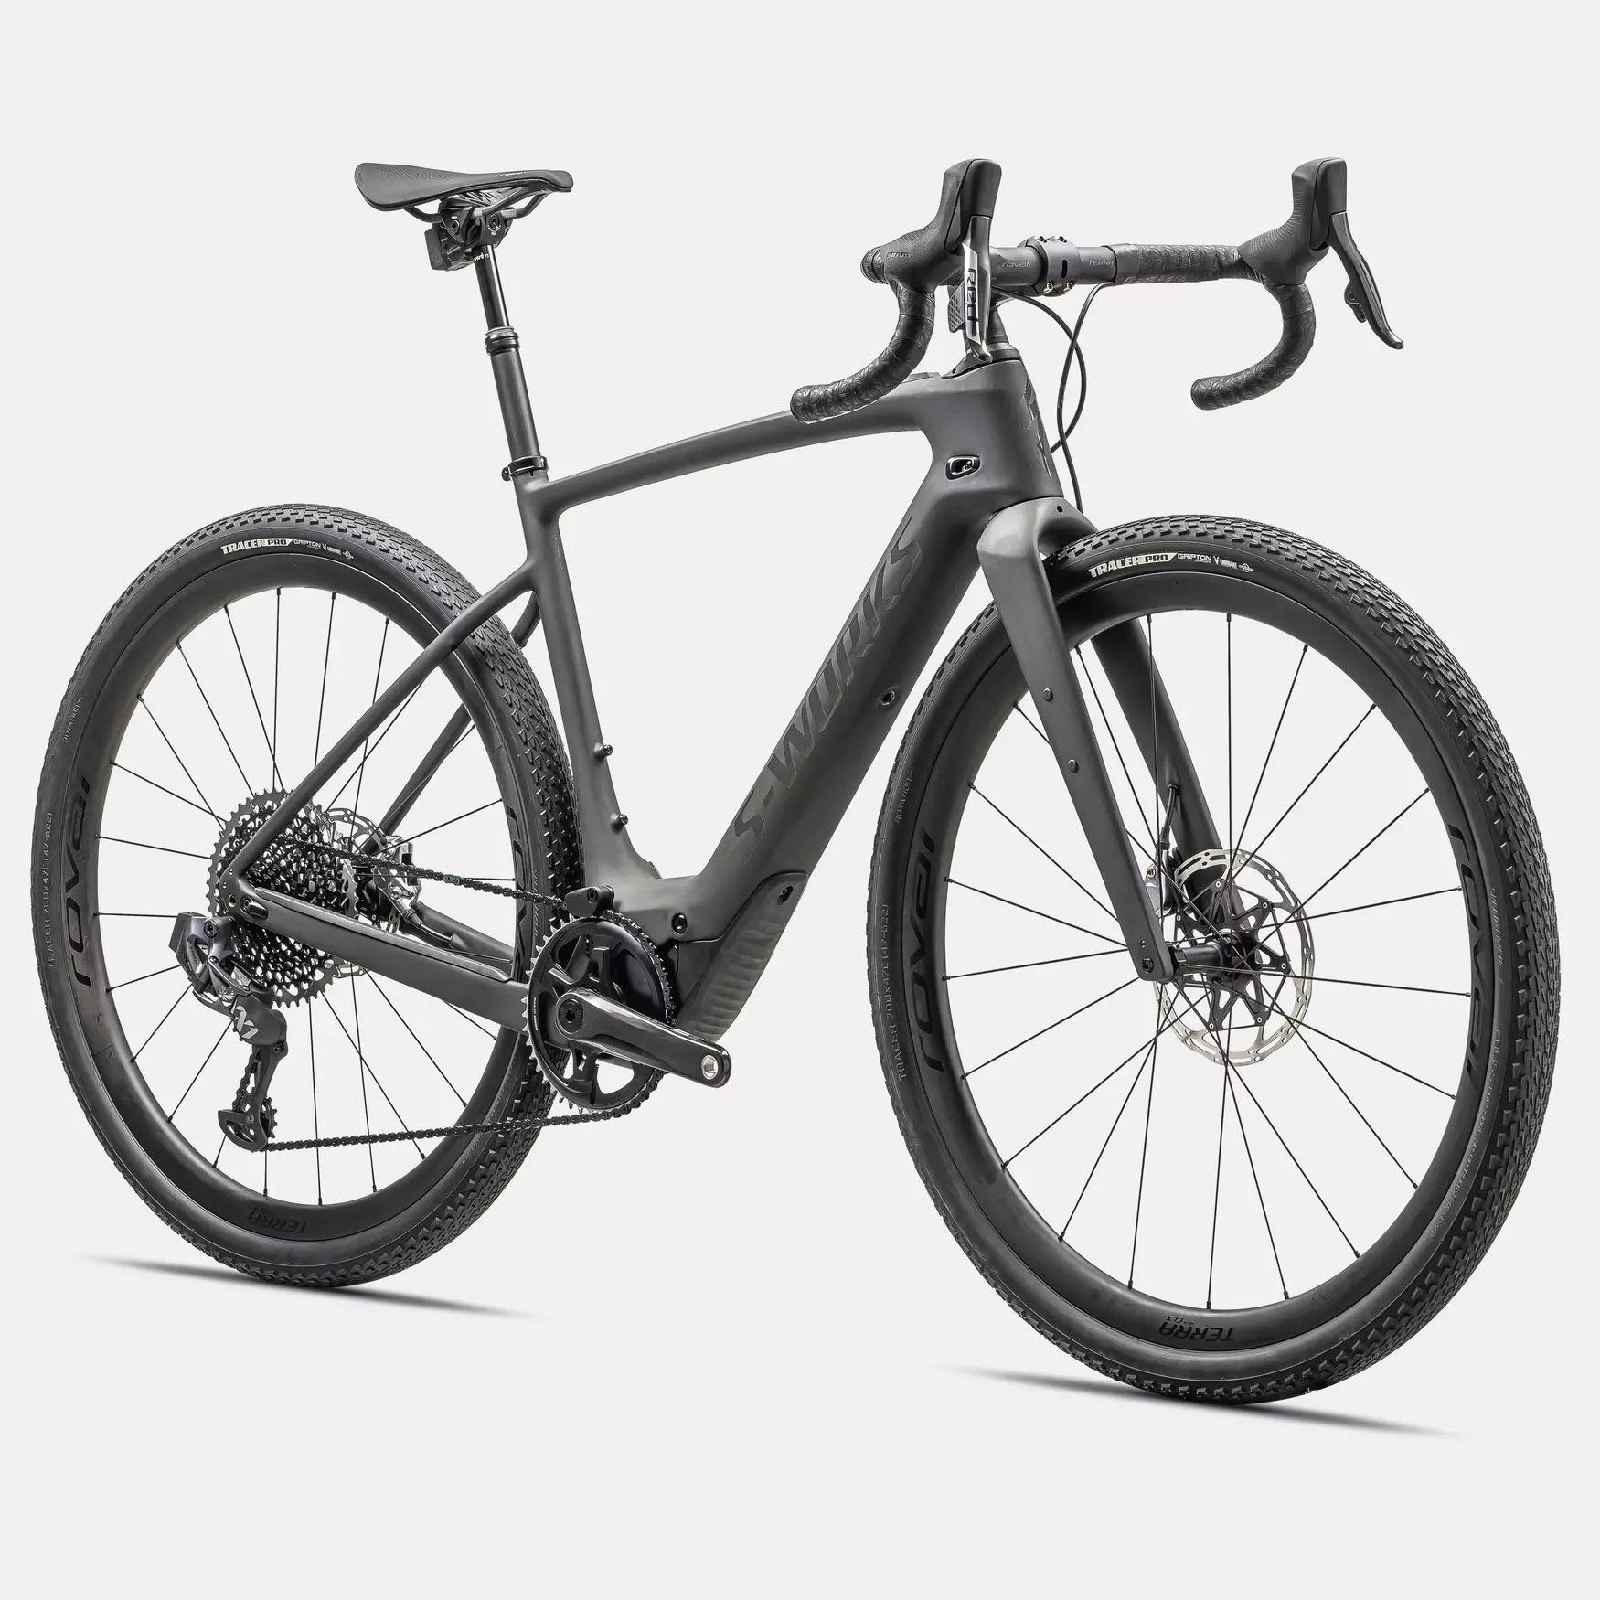 CREO 2 S-Works CARBON